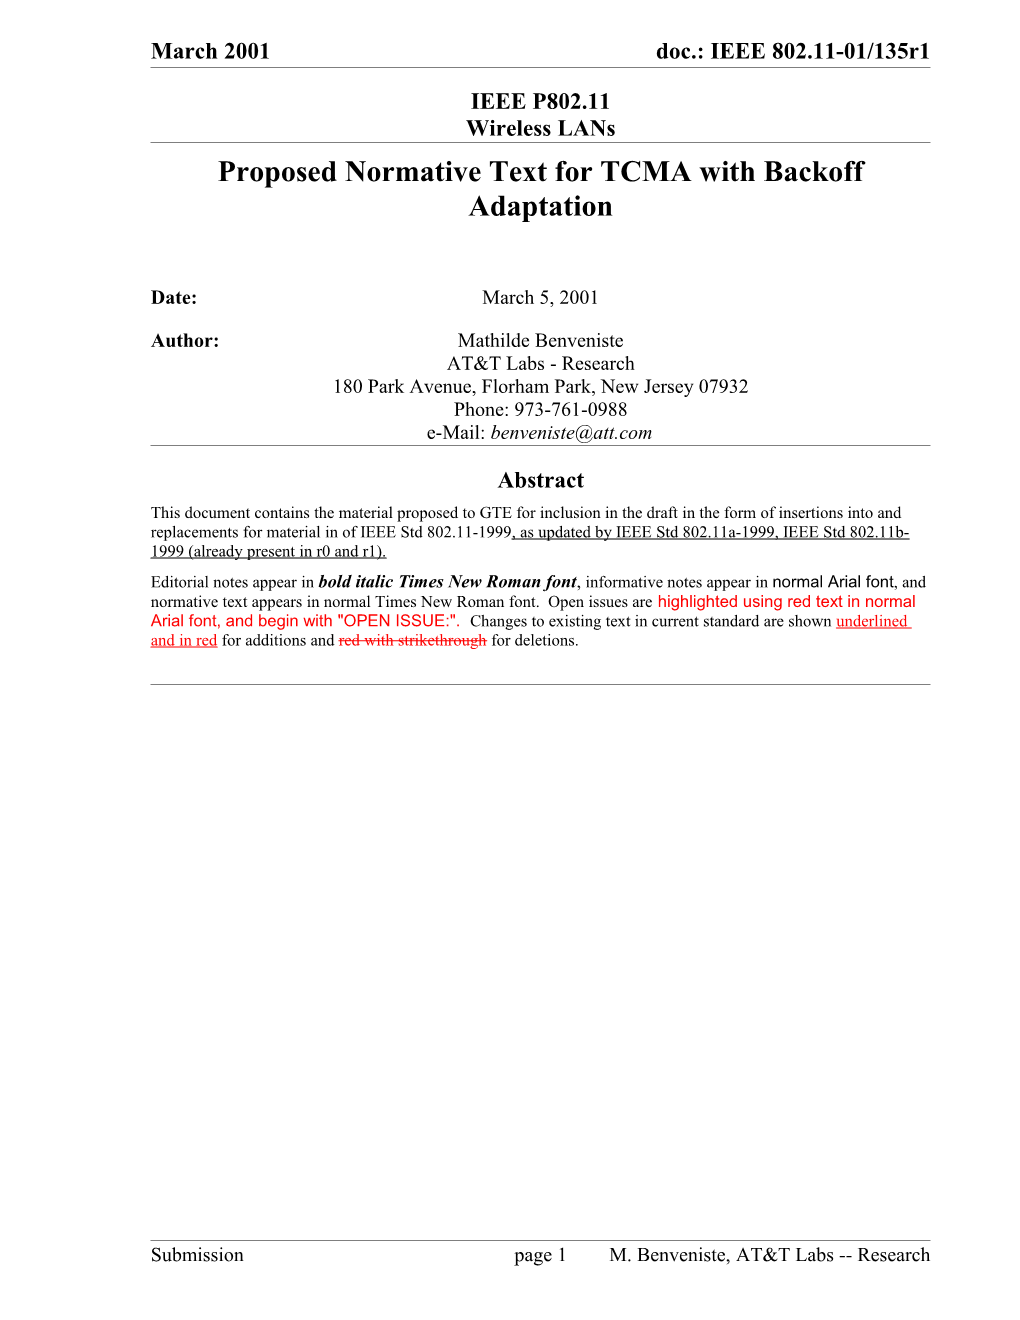 Proposed Normative Text for TCMA with Backoff Adaptation